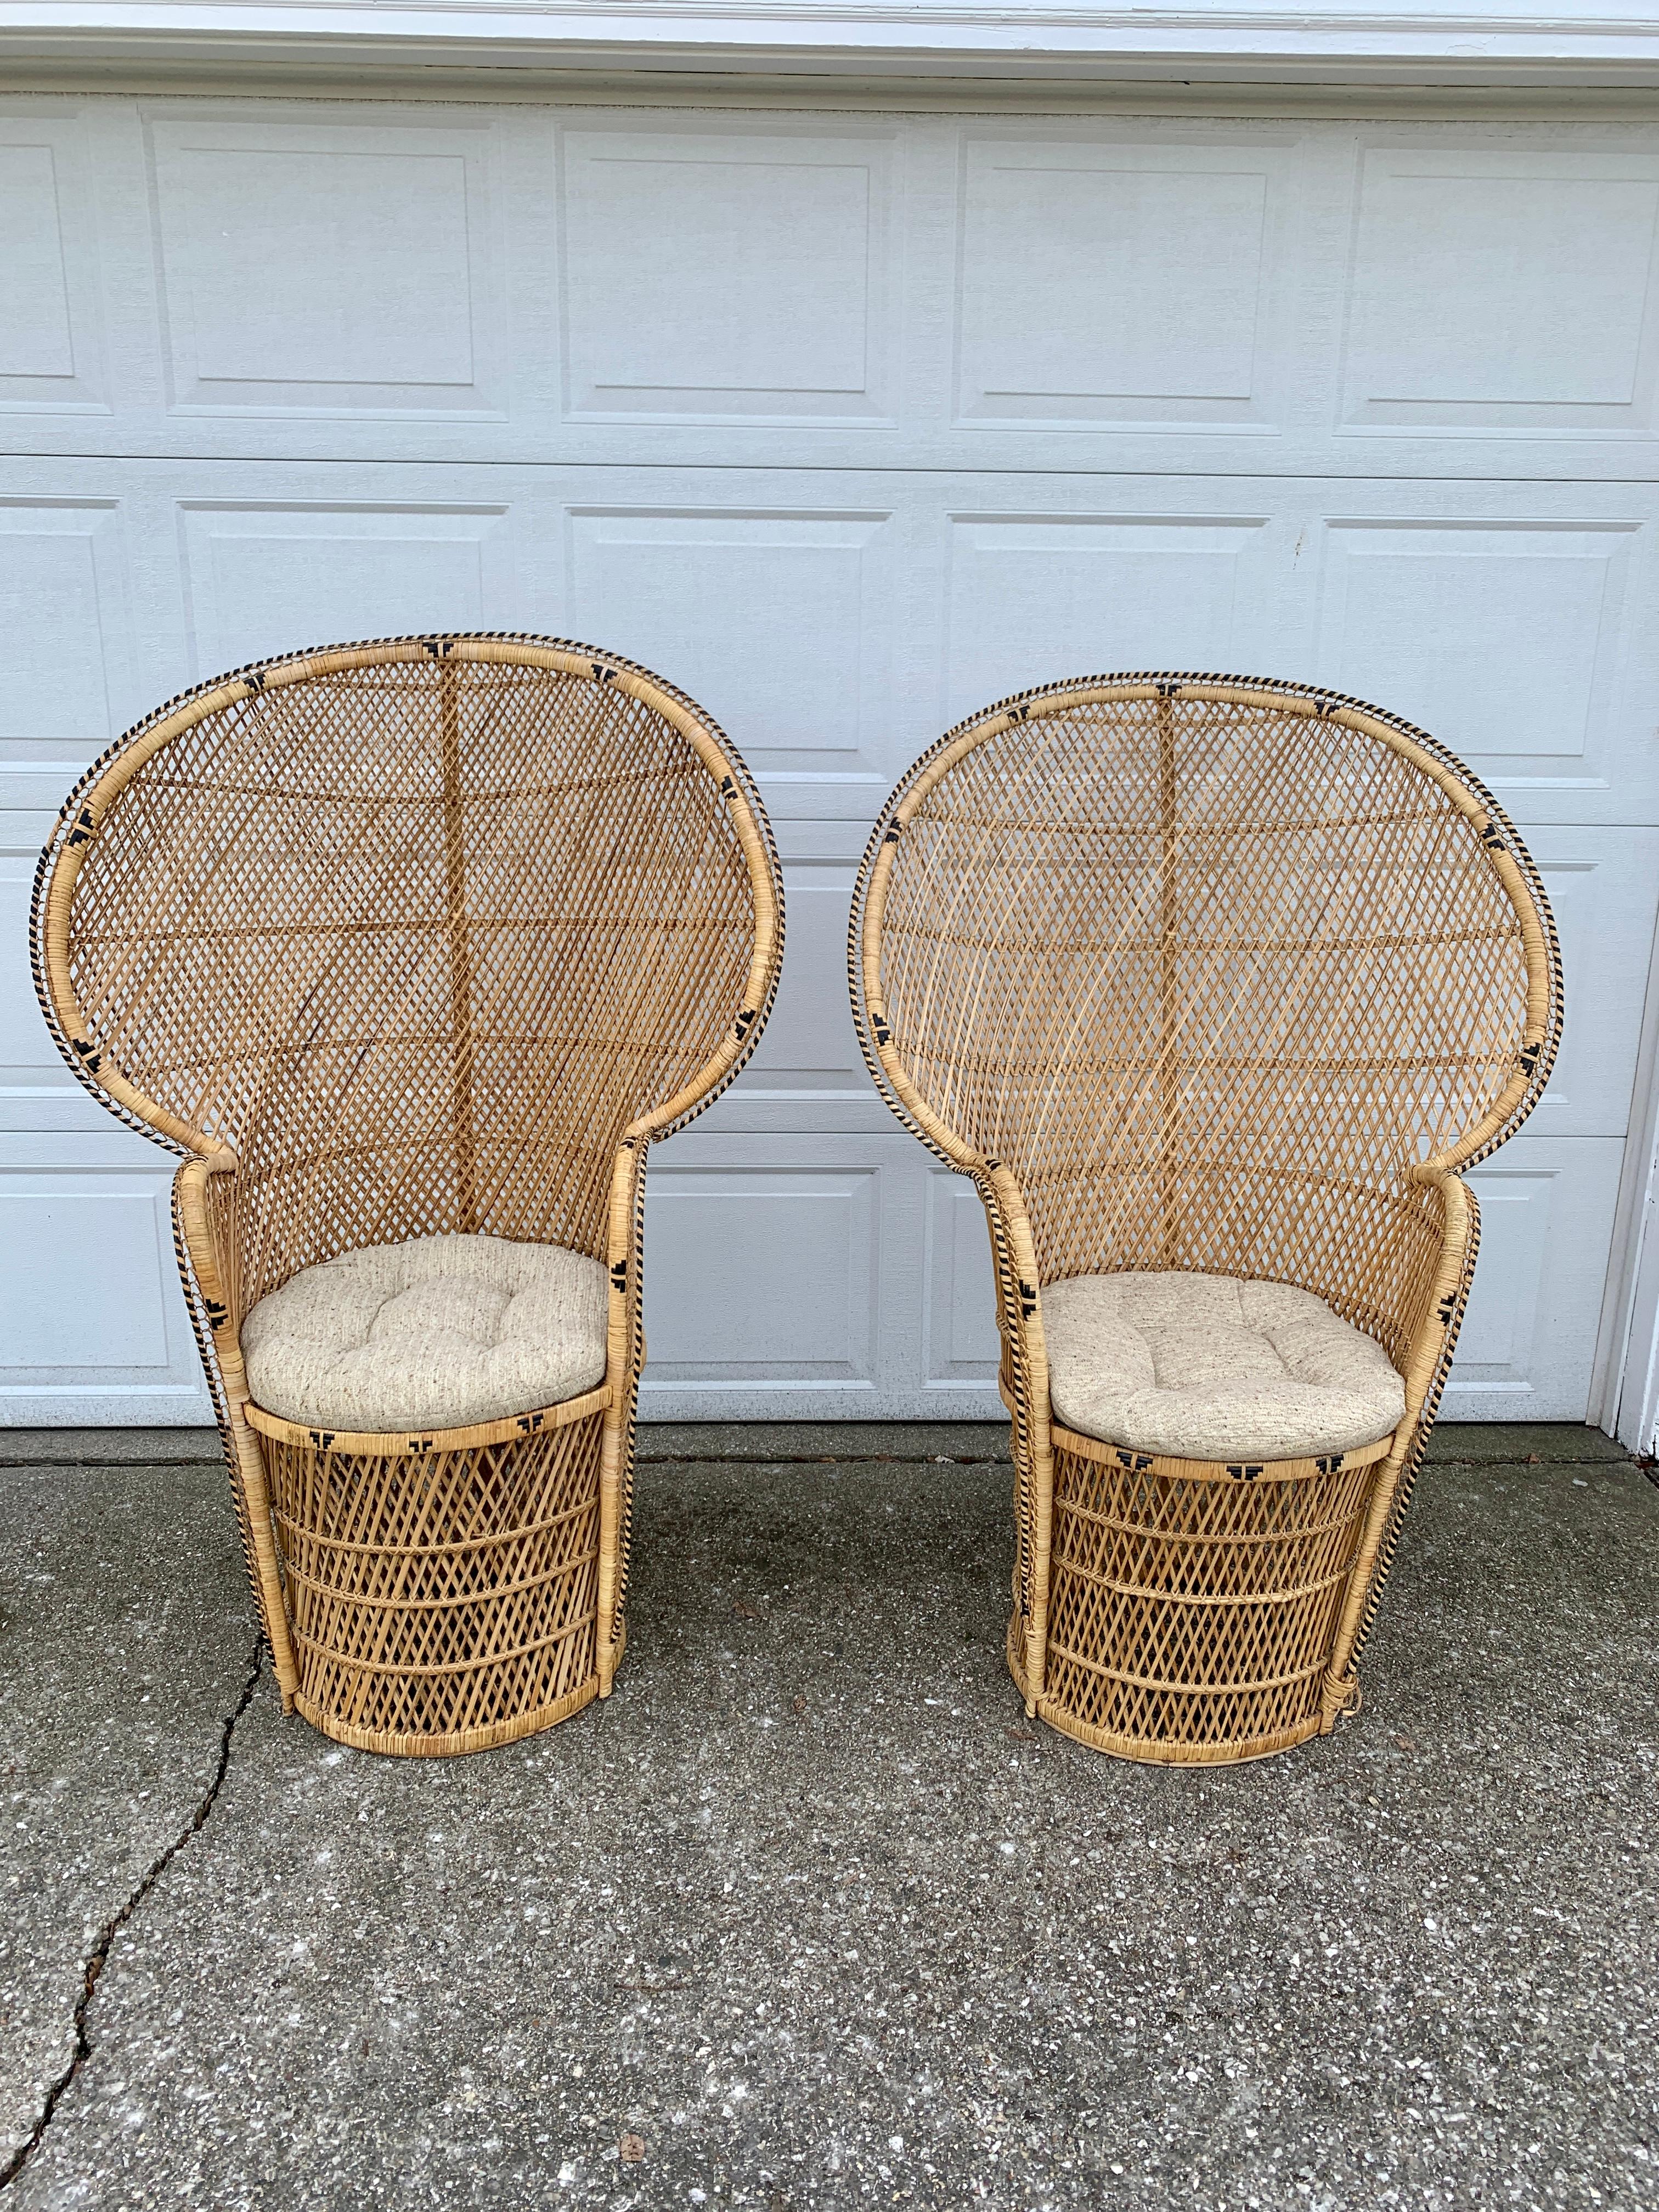 A gorgeous and iconic pair of mid-century modern Bohemian Emanuelle peacock chair??s

Circa 1970s??

Woven rattan and wicker, with a large scale fan back.??

Measures: 36.25”W x 21”D x 53”H. Seat height 19